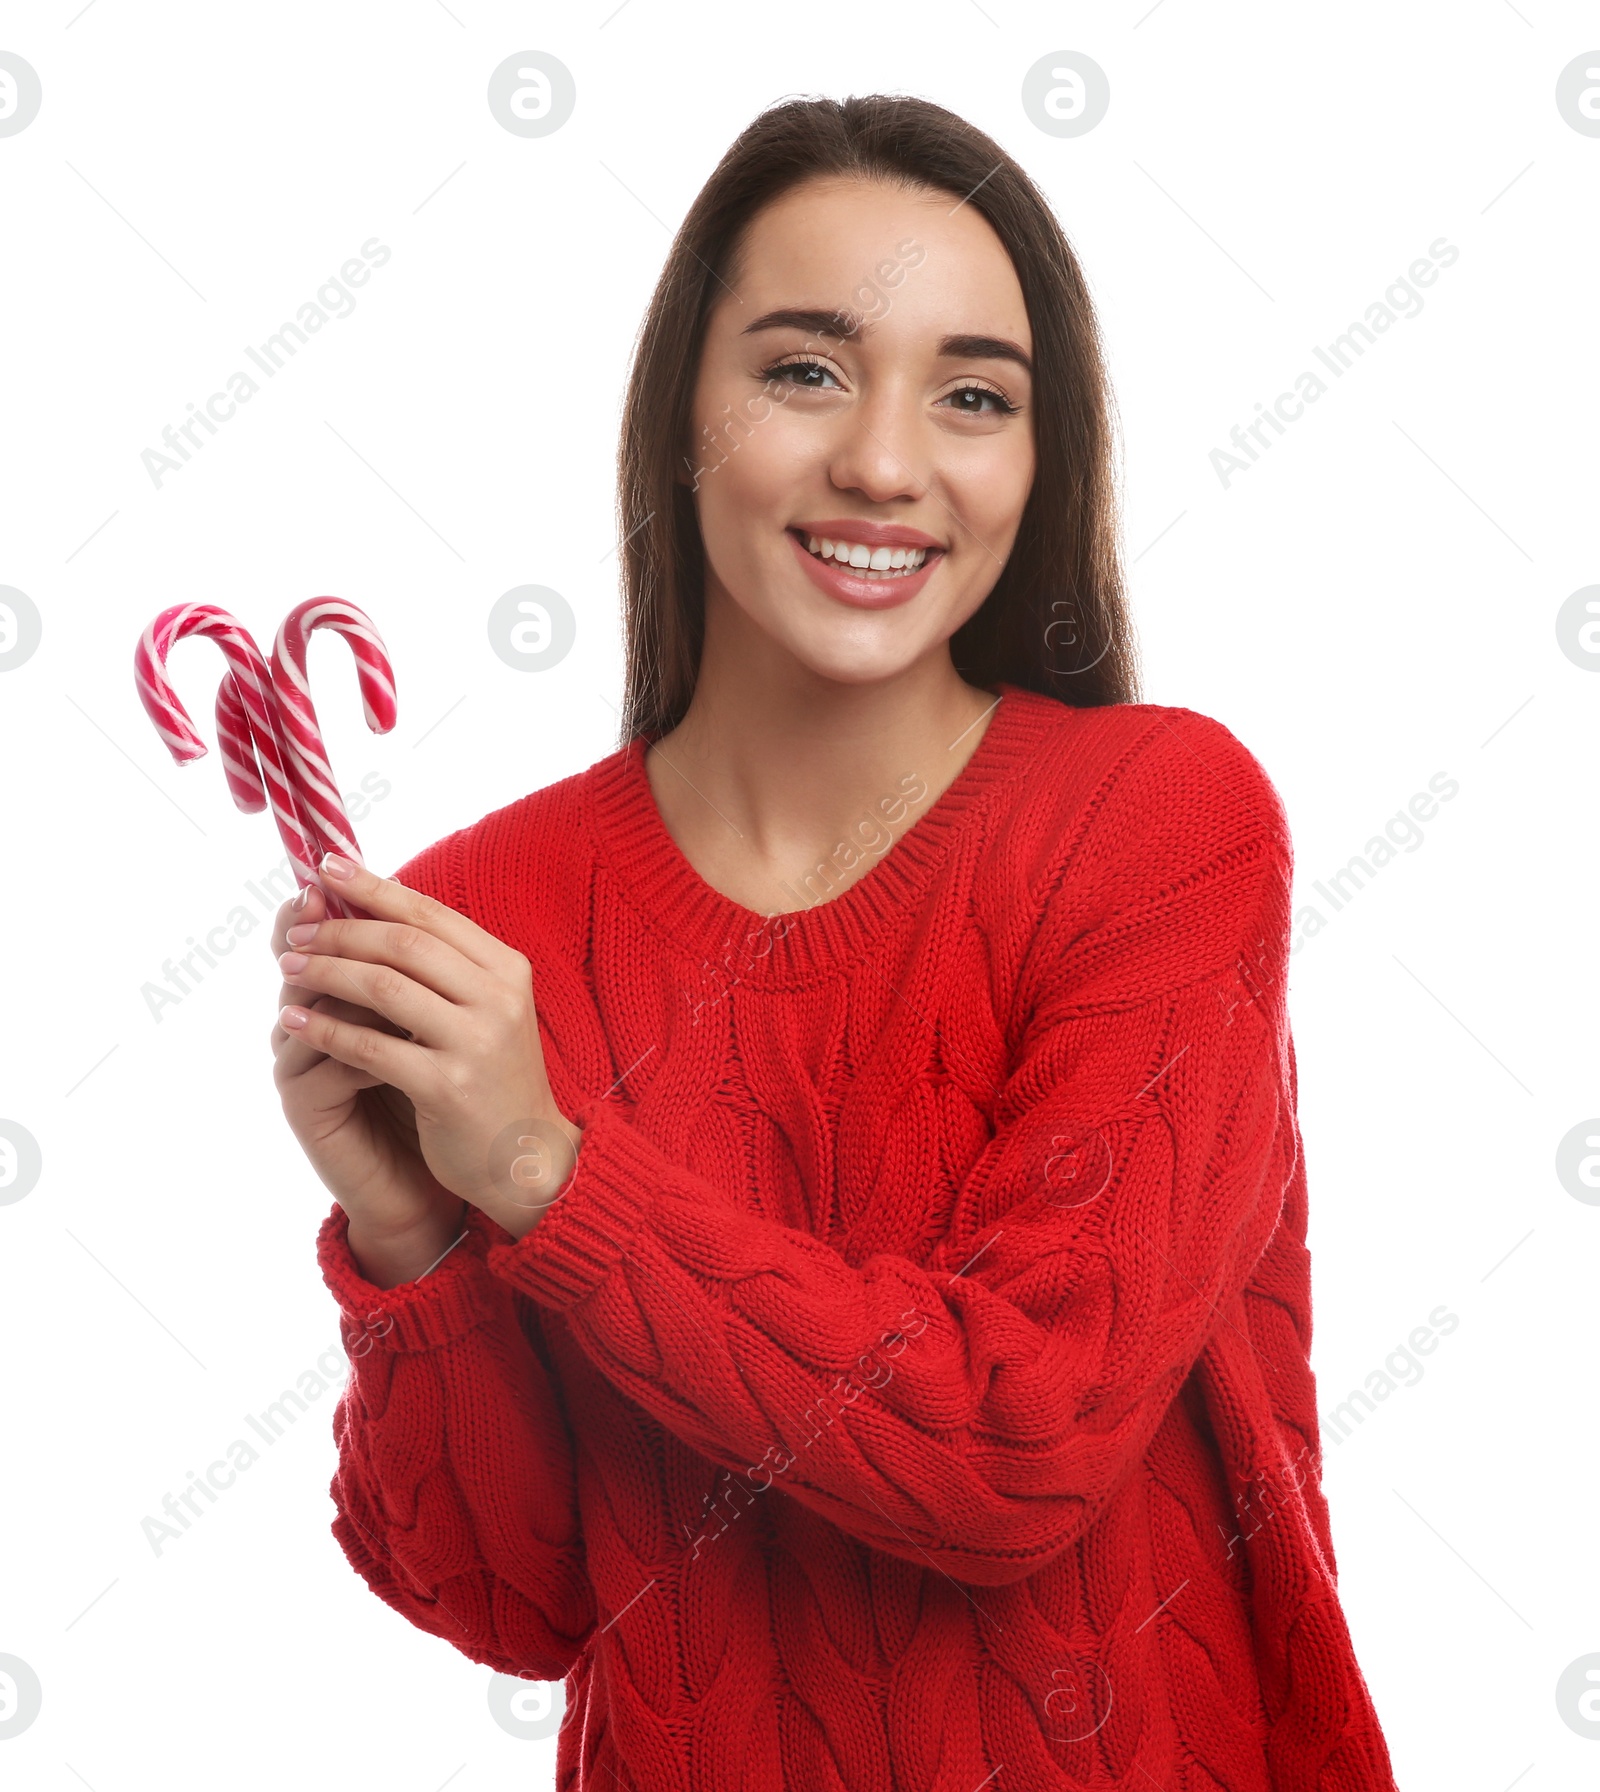 Photo of Young woman in red sweater holding candy canes on white background